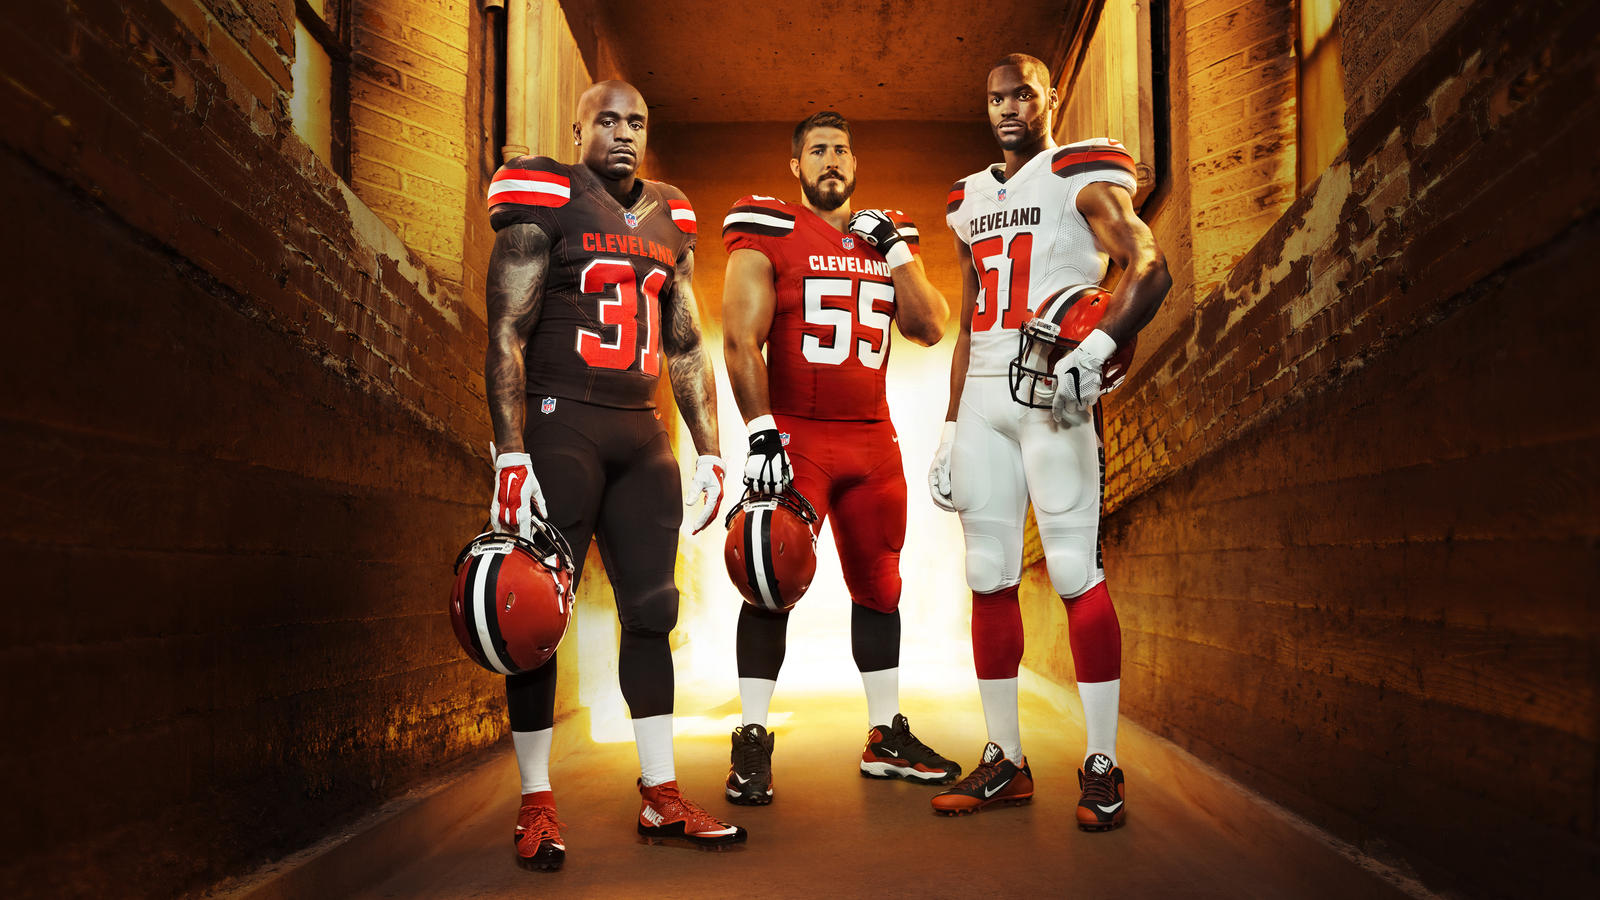 Cleveland Browns Celebrate Their Fans And Team History With New